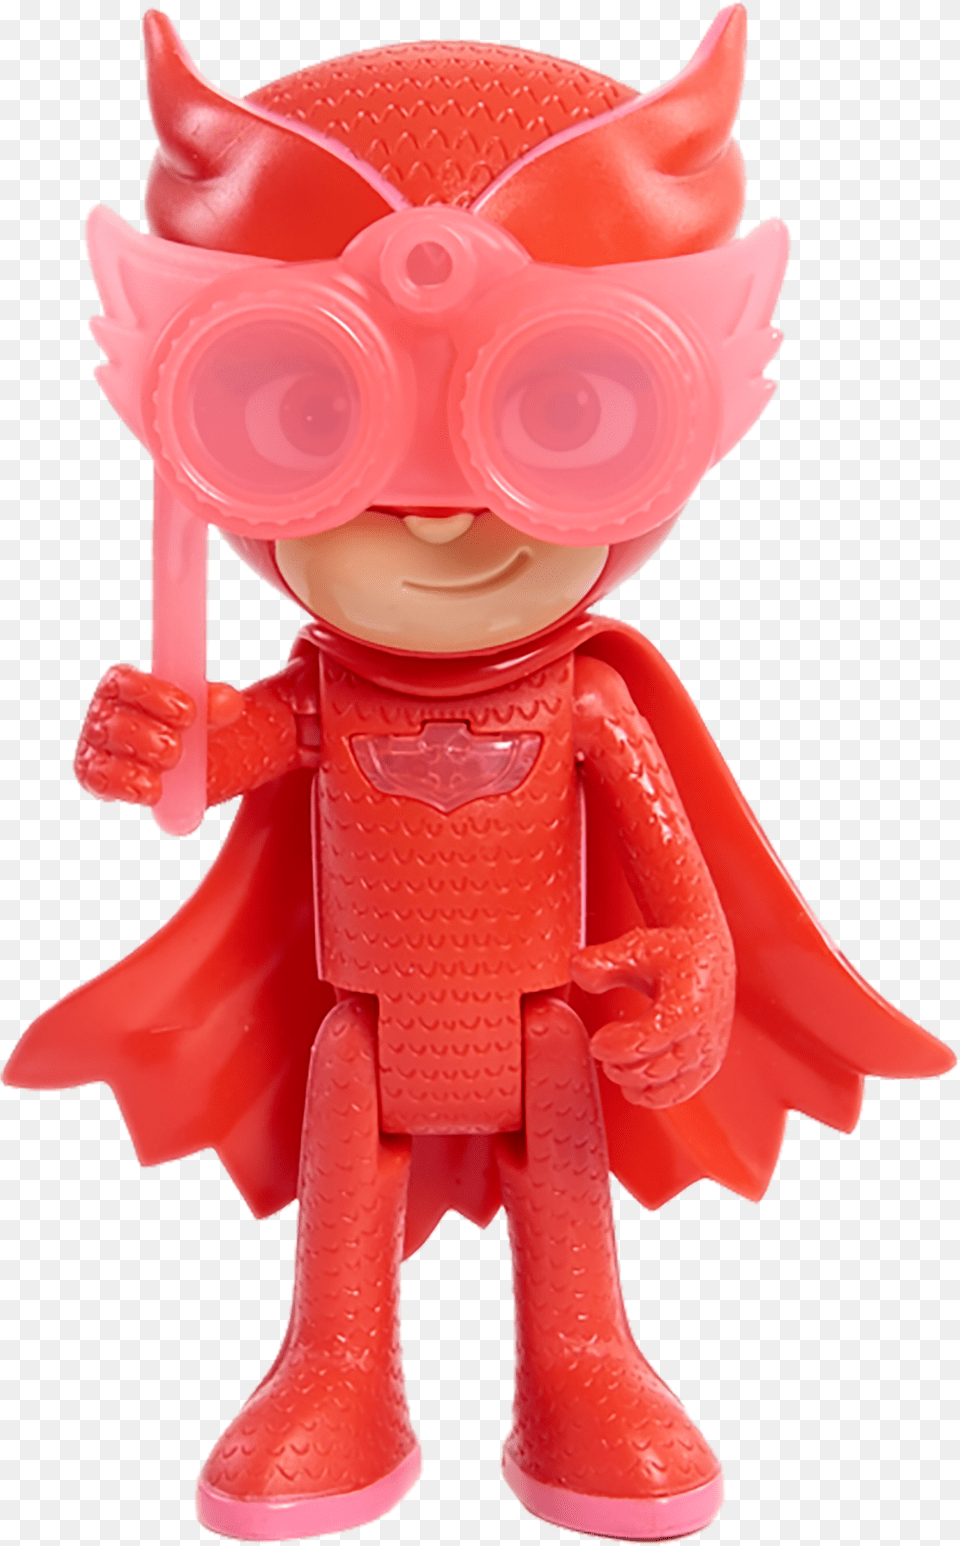 Pj Masks Deluxe Talking Figure Action Figure, Baby, Person, Toy Free Transparent Png